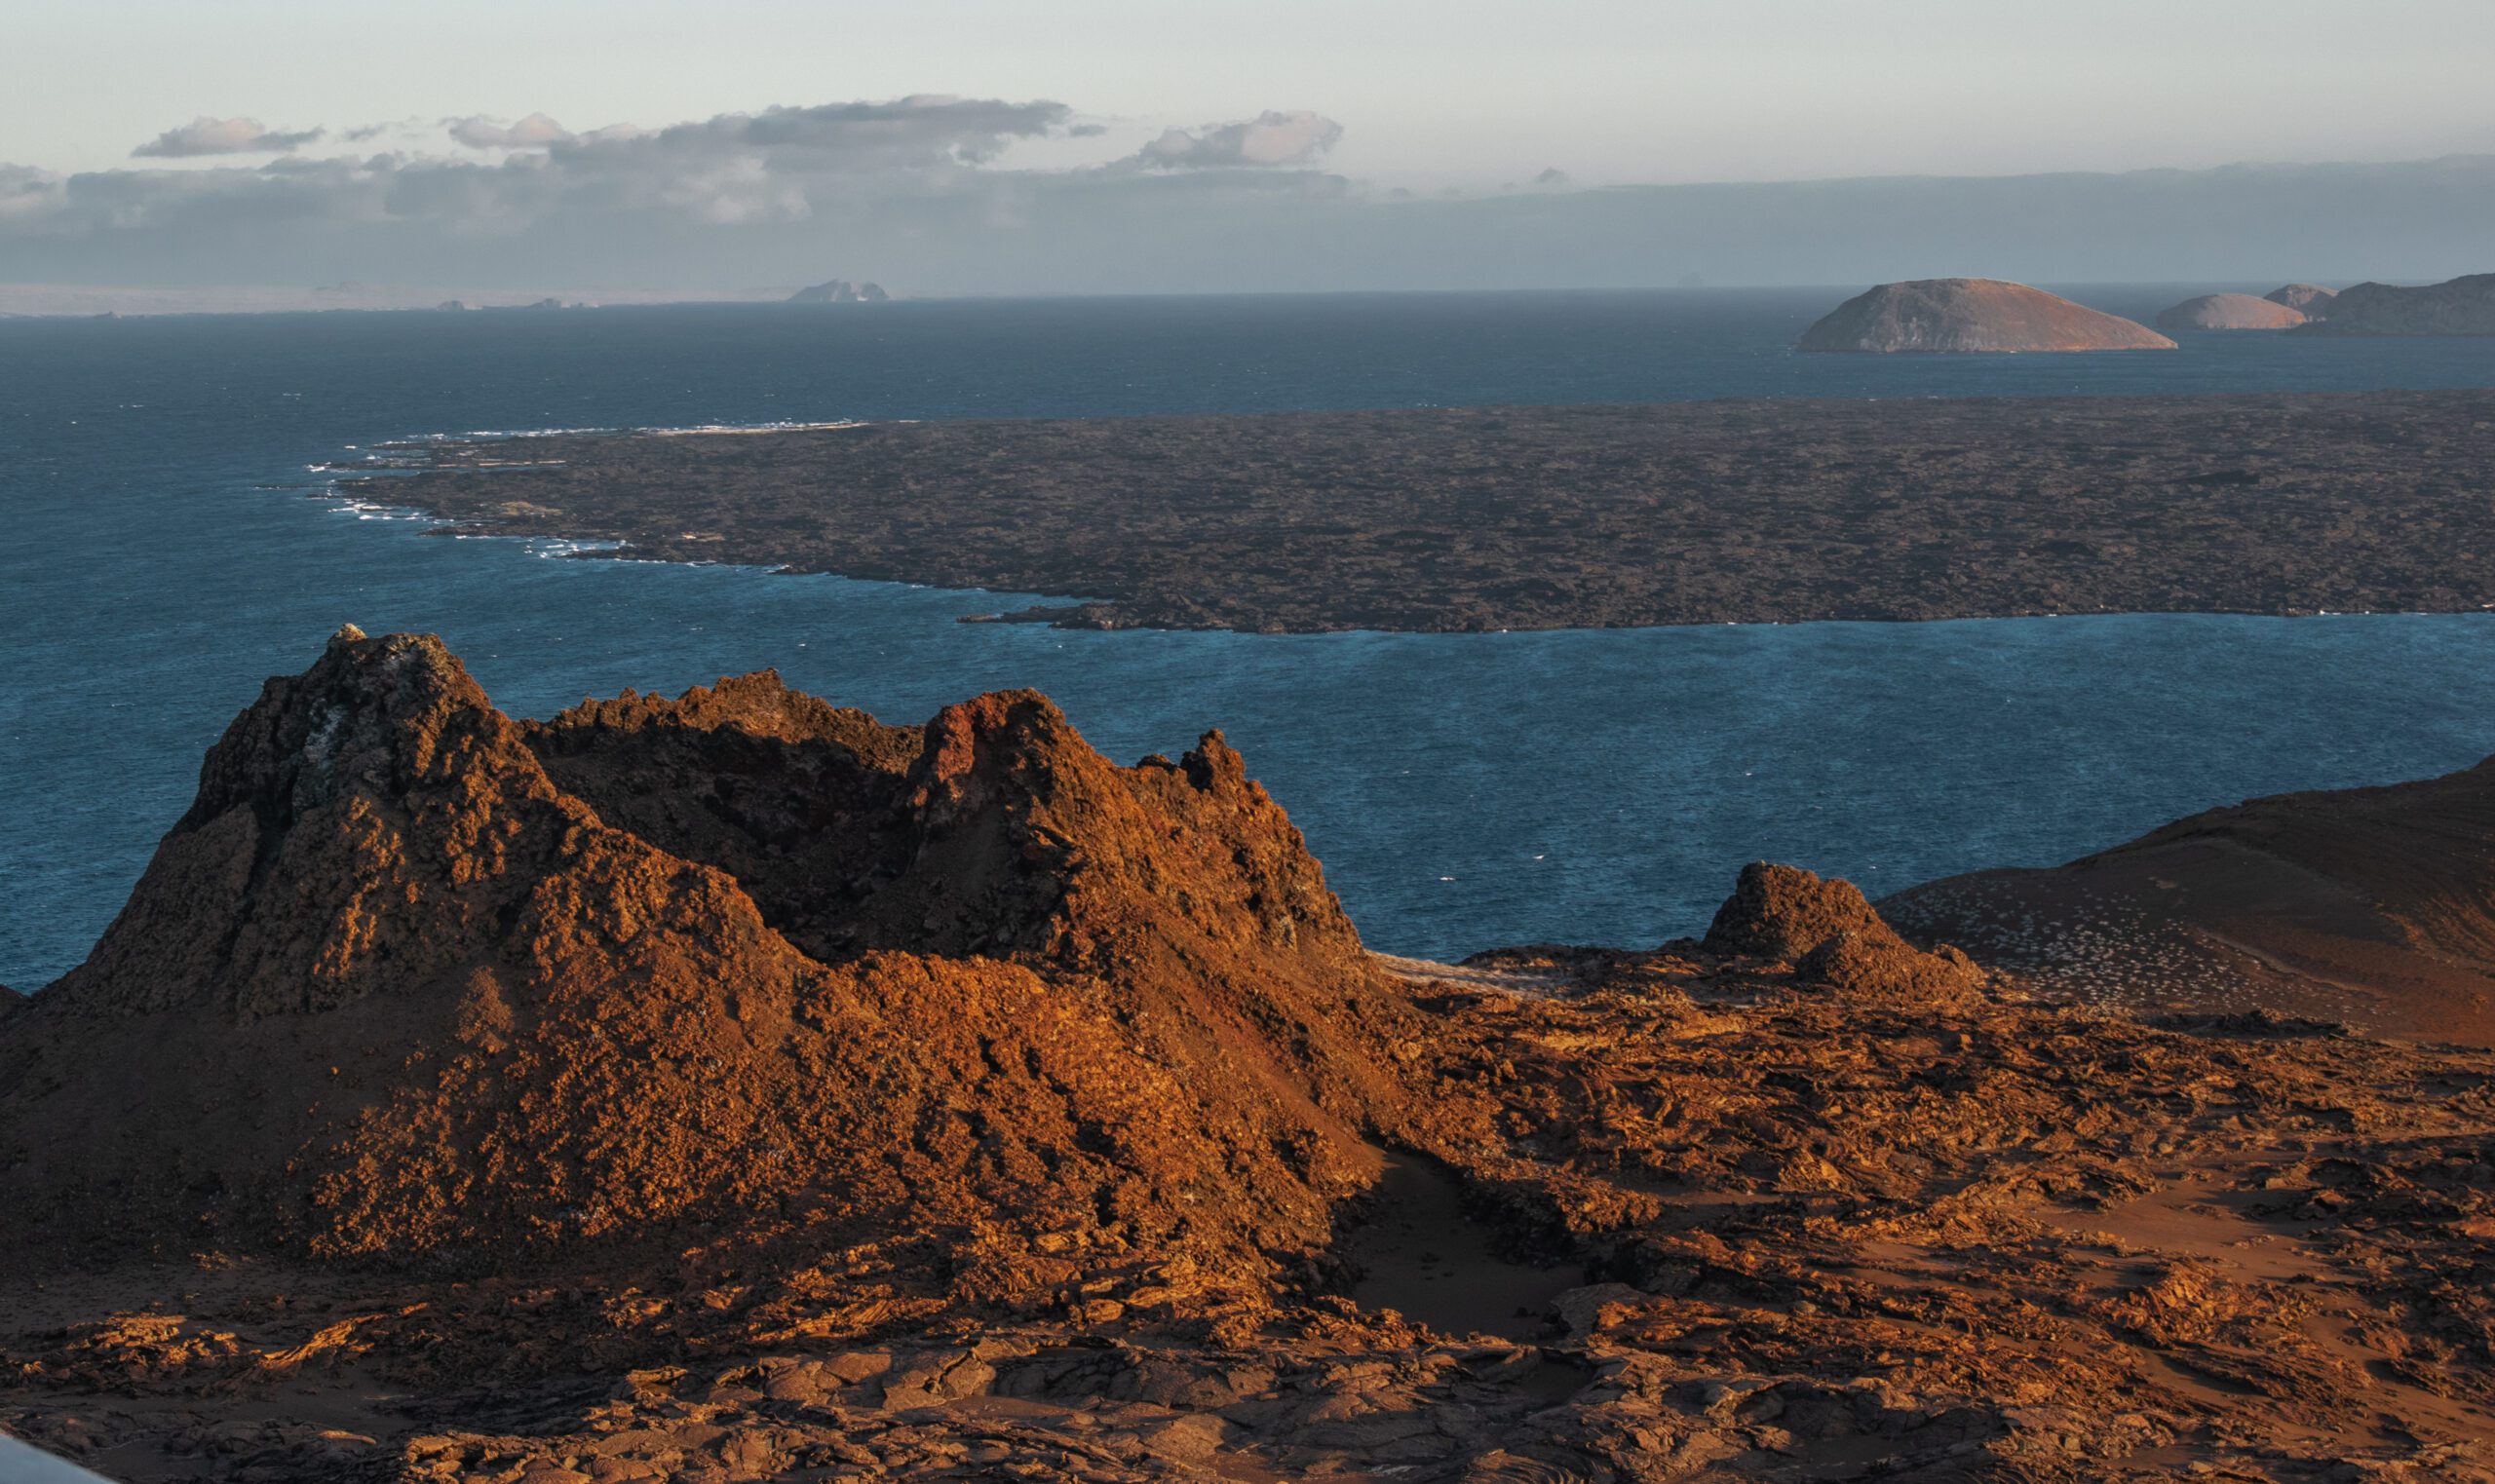 wide shot of the Galapagos ialnds